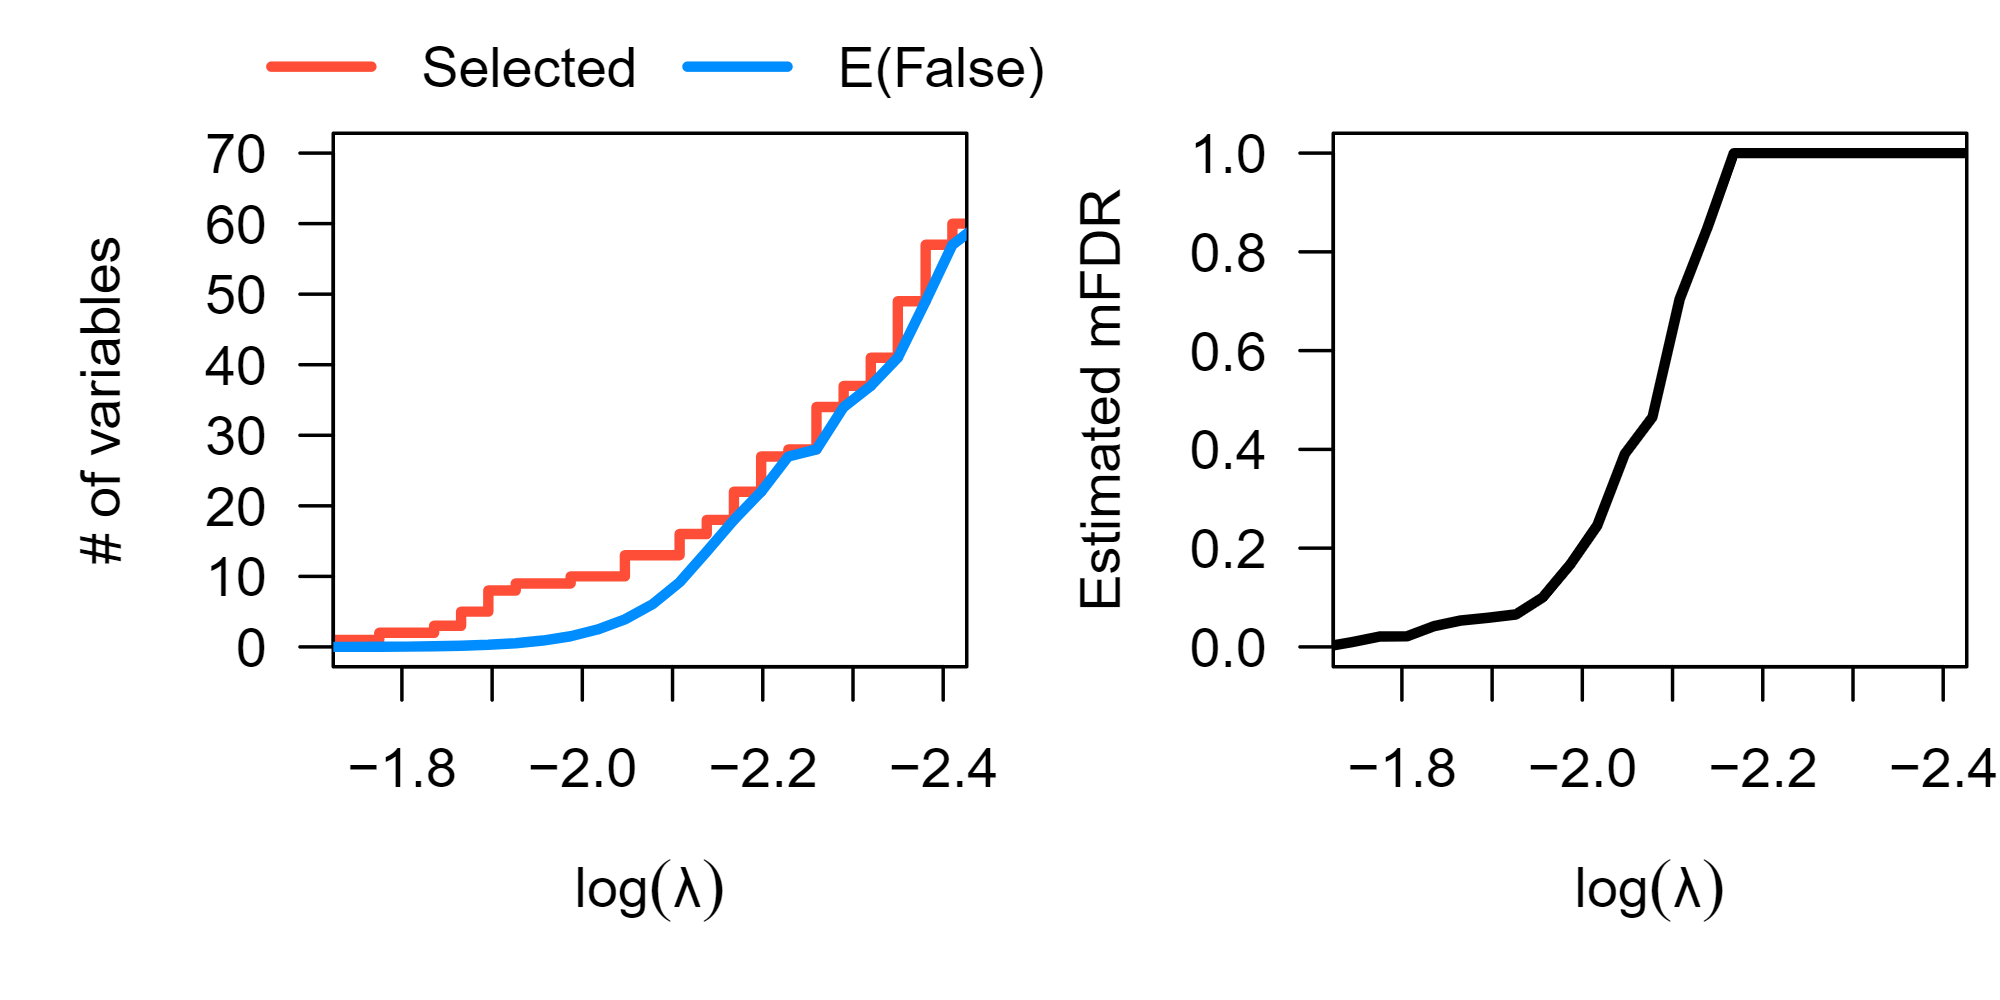 Fig 1: The figure above displays marginal false discovery estimates for a series of lasso penalized survival models for the survival outcomes of 442 early-stage lung cancer subjects in response to 22,283 gene expression measurements and additional clinical covariates.  The left panel shows the number of genetic features selected by the lasso relative to the expected number of marginal false discoveries, while the right panel shows the expected marginal false discovery rate of each model.